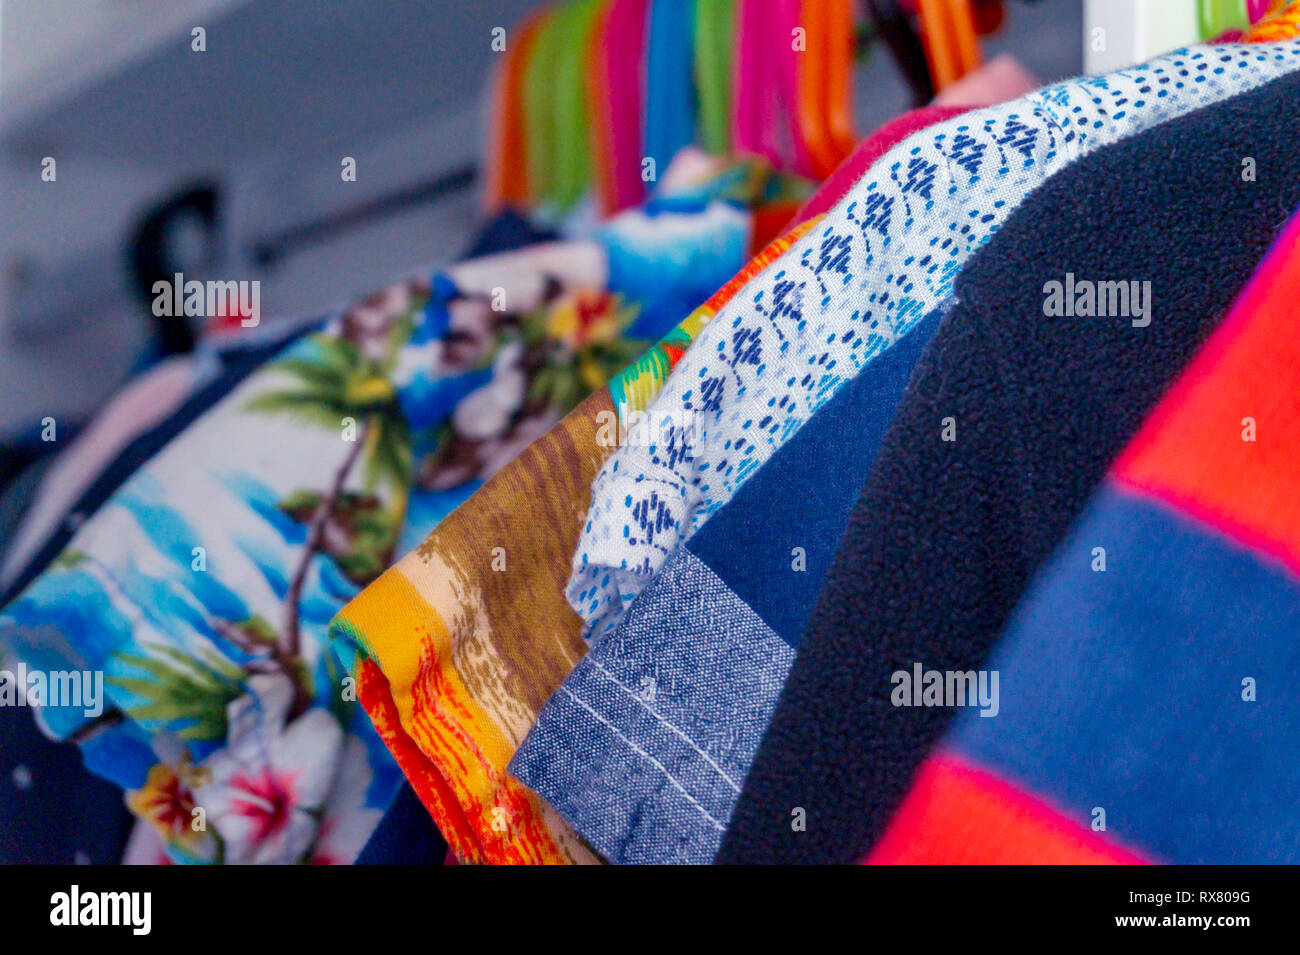 Closeup of child boy's summer clothes hanging in a closet, showing shirts and sweaters. Stock Photo